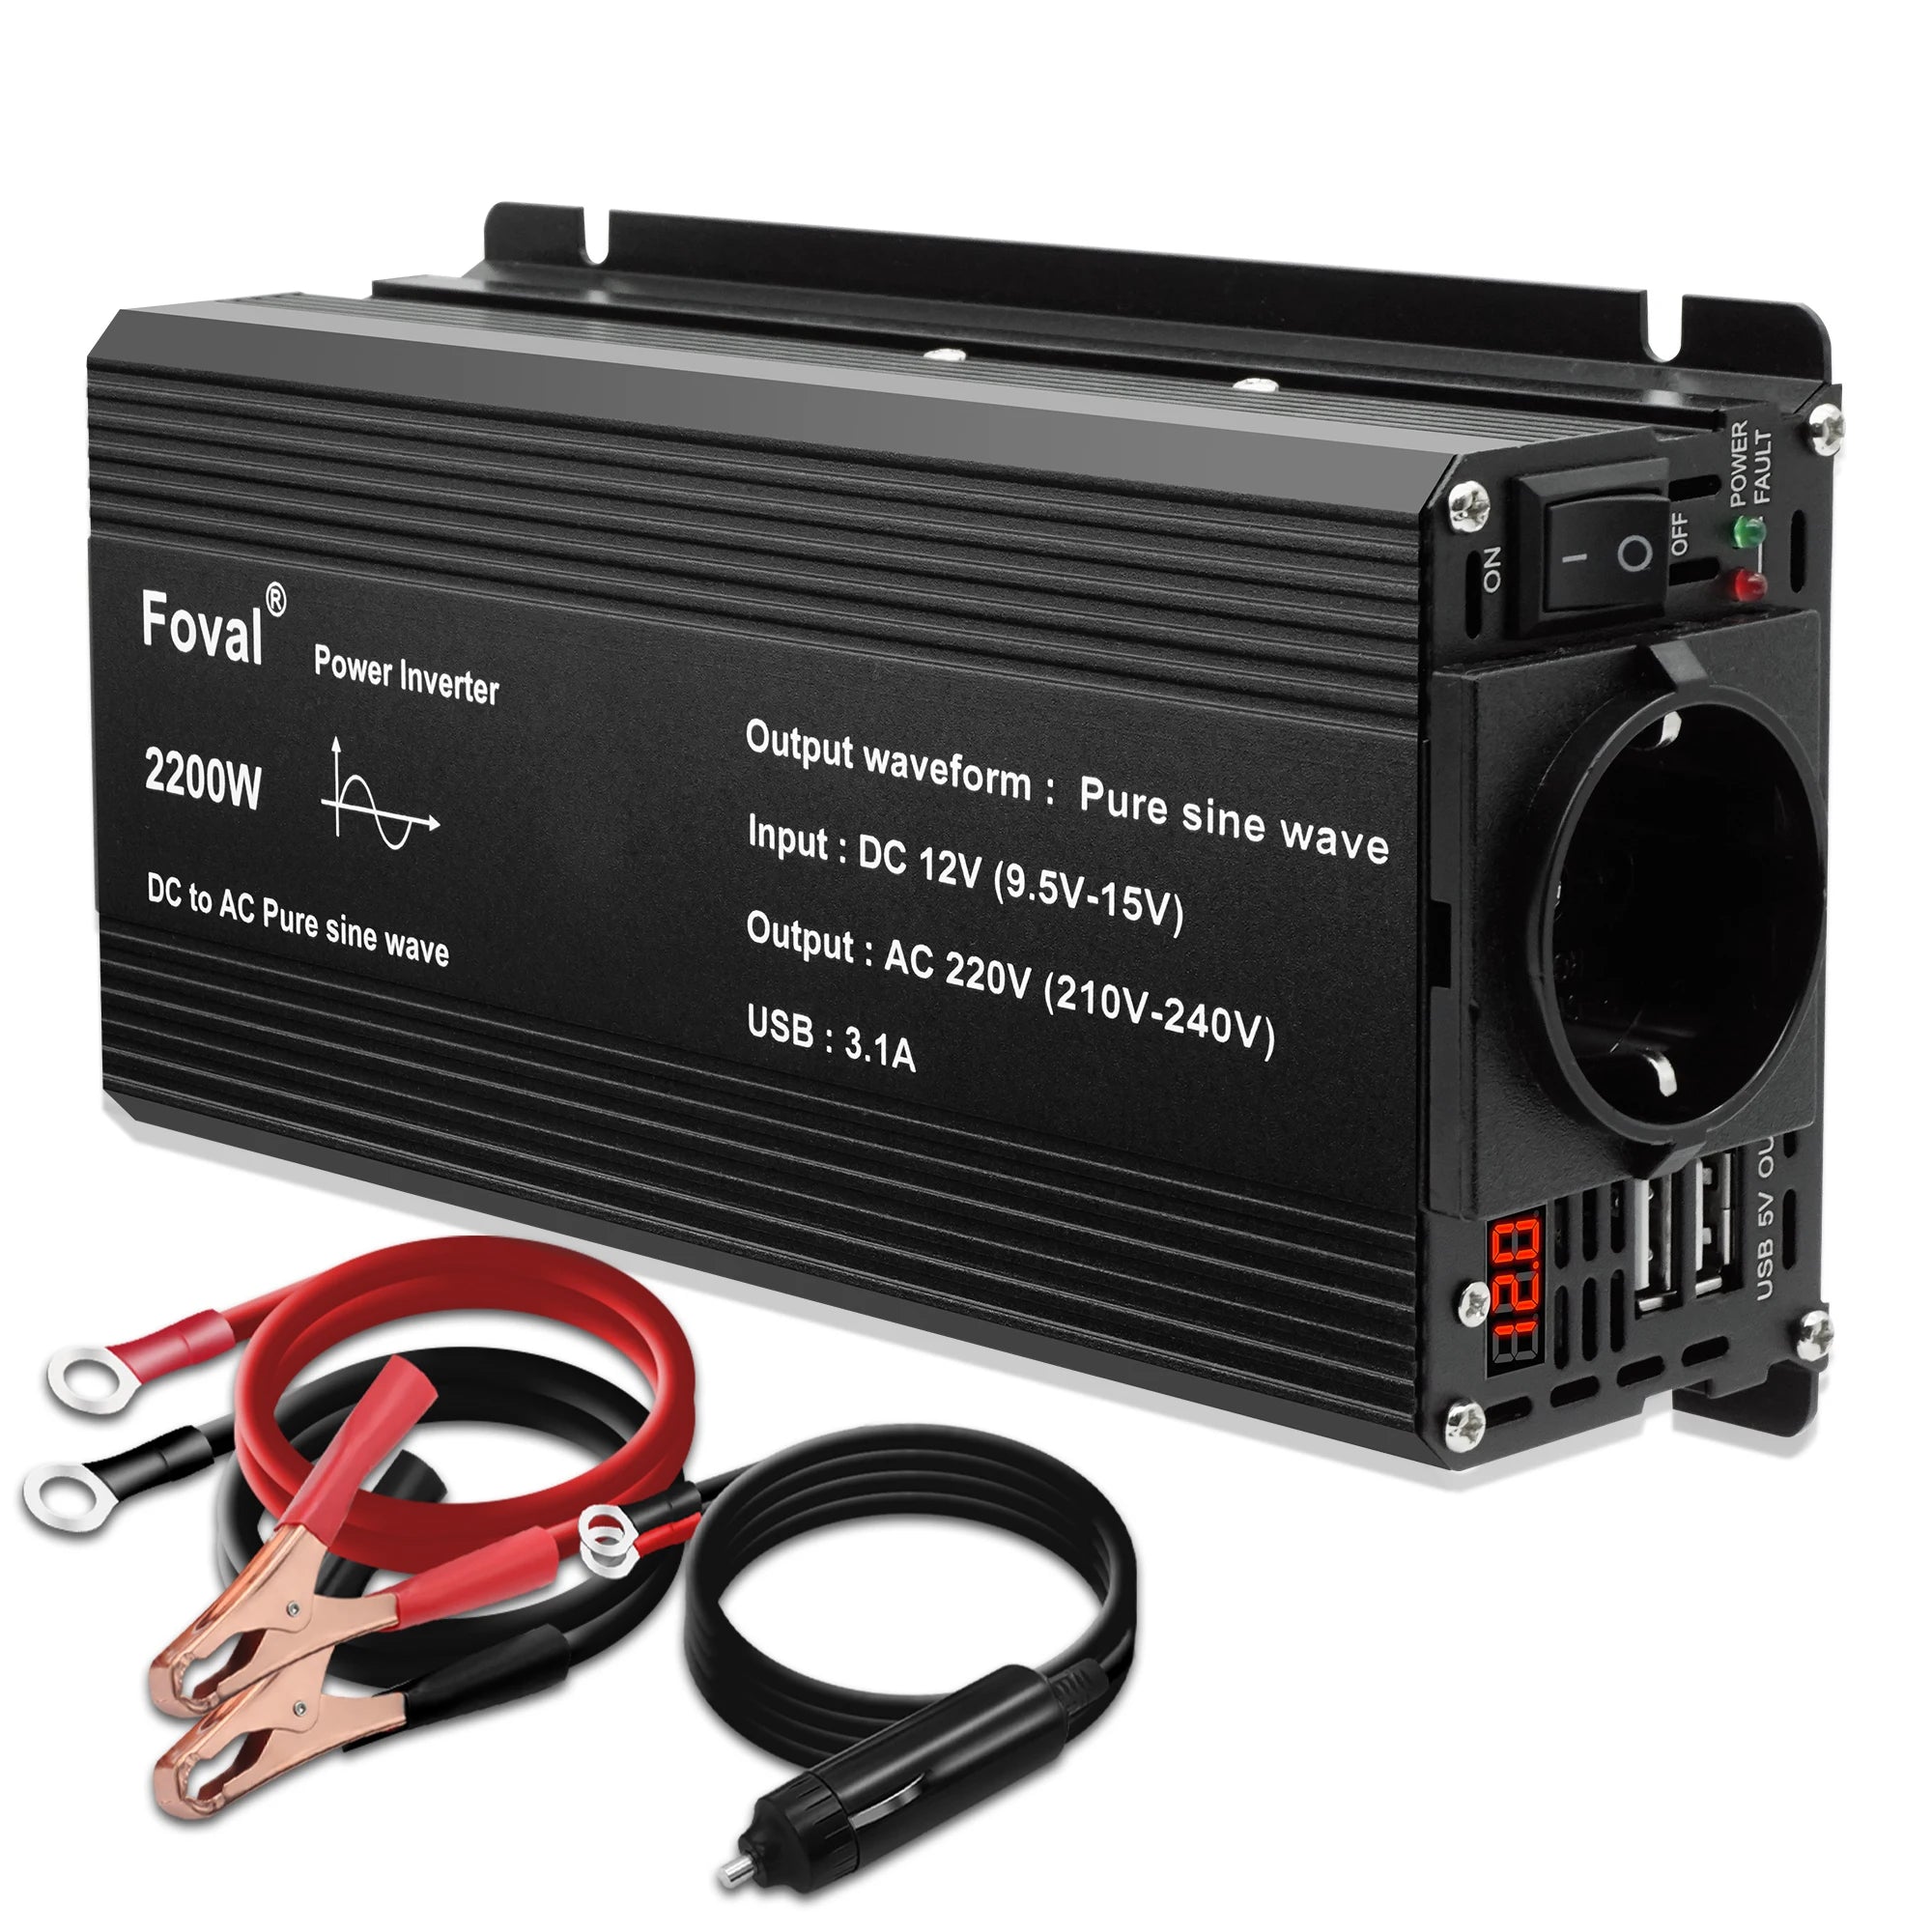 DC 12V to AC 220V Pure Sine Wave Inverter, Foval DC/AC Inverter: customizable, pure sine wave output, 1-200kW power, 50Hz frequency, CE certified.